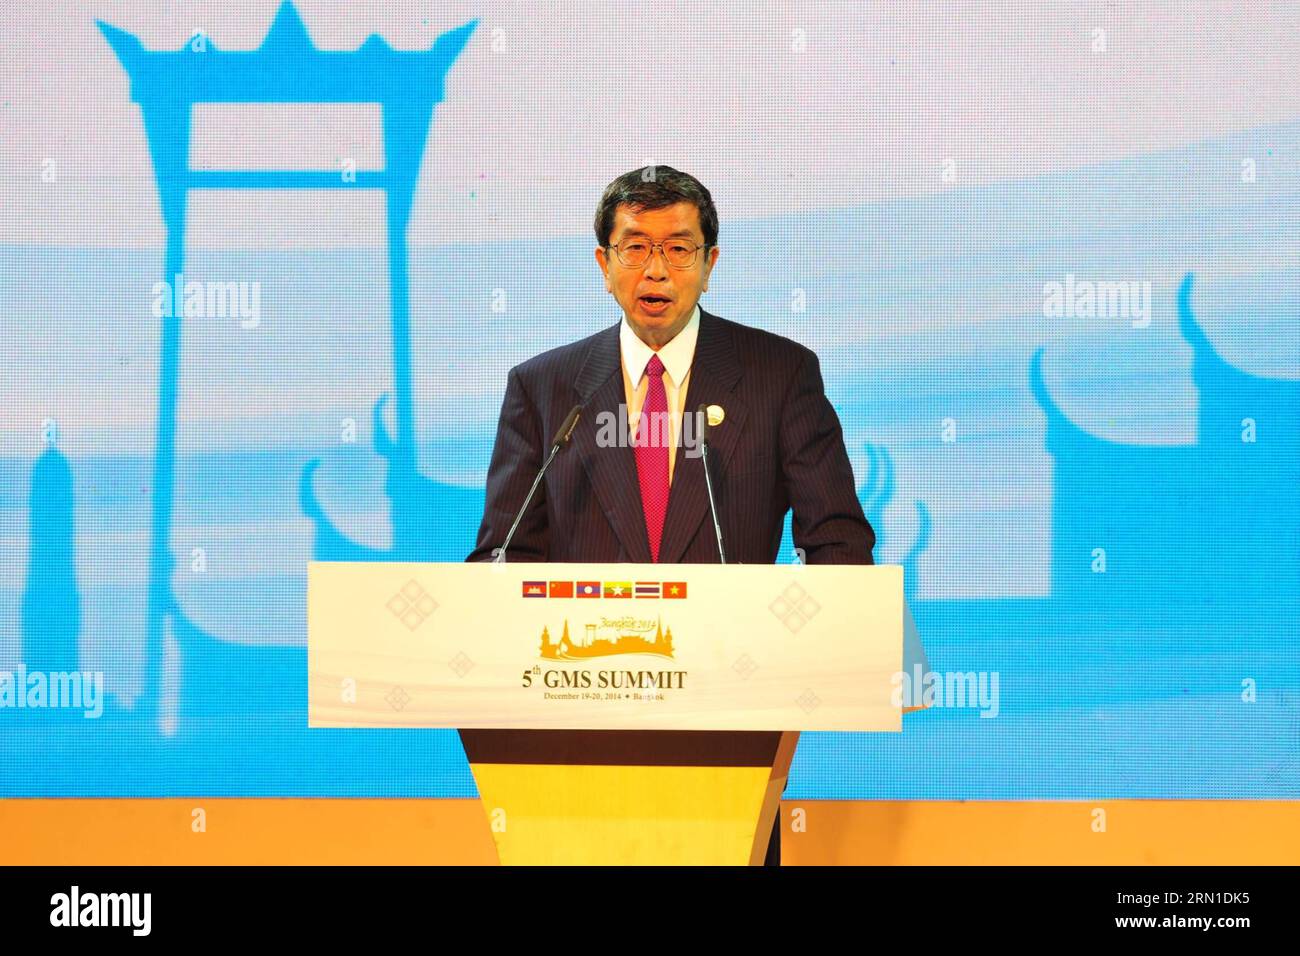 https://c8.alamy.com/comp/2RN1DK5/141220-bangkok-dec-20-2014-president-of-the-asian-development-bank-adb-takehiko-nakao-delivers-a-speech-at-the-opening-ceremony-of-the-fifth-summit-of-the-greater-mekong-subregion-gms-economic-cooperation-in-bangkok-thailand-dec-20-2014-thailand-bangkok-adb-gms-speech-rachenxsageamsak-publicationxnotxinxchn-bangkok-dec-20-2014-president-of-the-asian-development-bank-adb-takehiko-nakao-delivers-a-speech-at-the-opening-ceremony-of-the-fifth-summit-of-the-greater-mekong-subregion-gms-economic-cooperation-in-bangkok-thai-country-dec-20-2014-thai-country-bangkok-adb-gms-spee-2RN1DK5.jpg